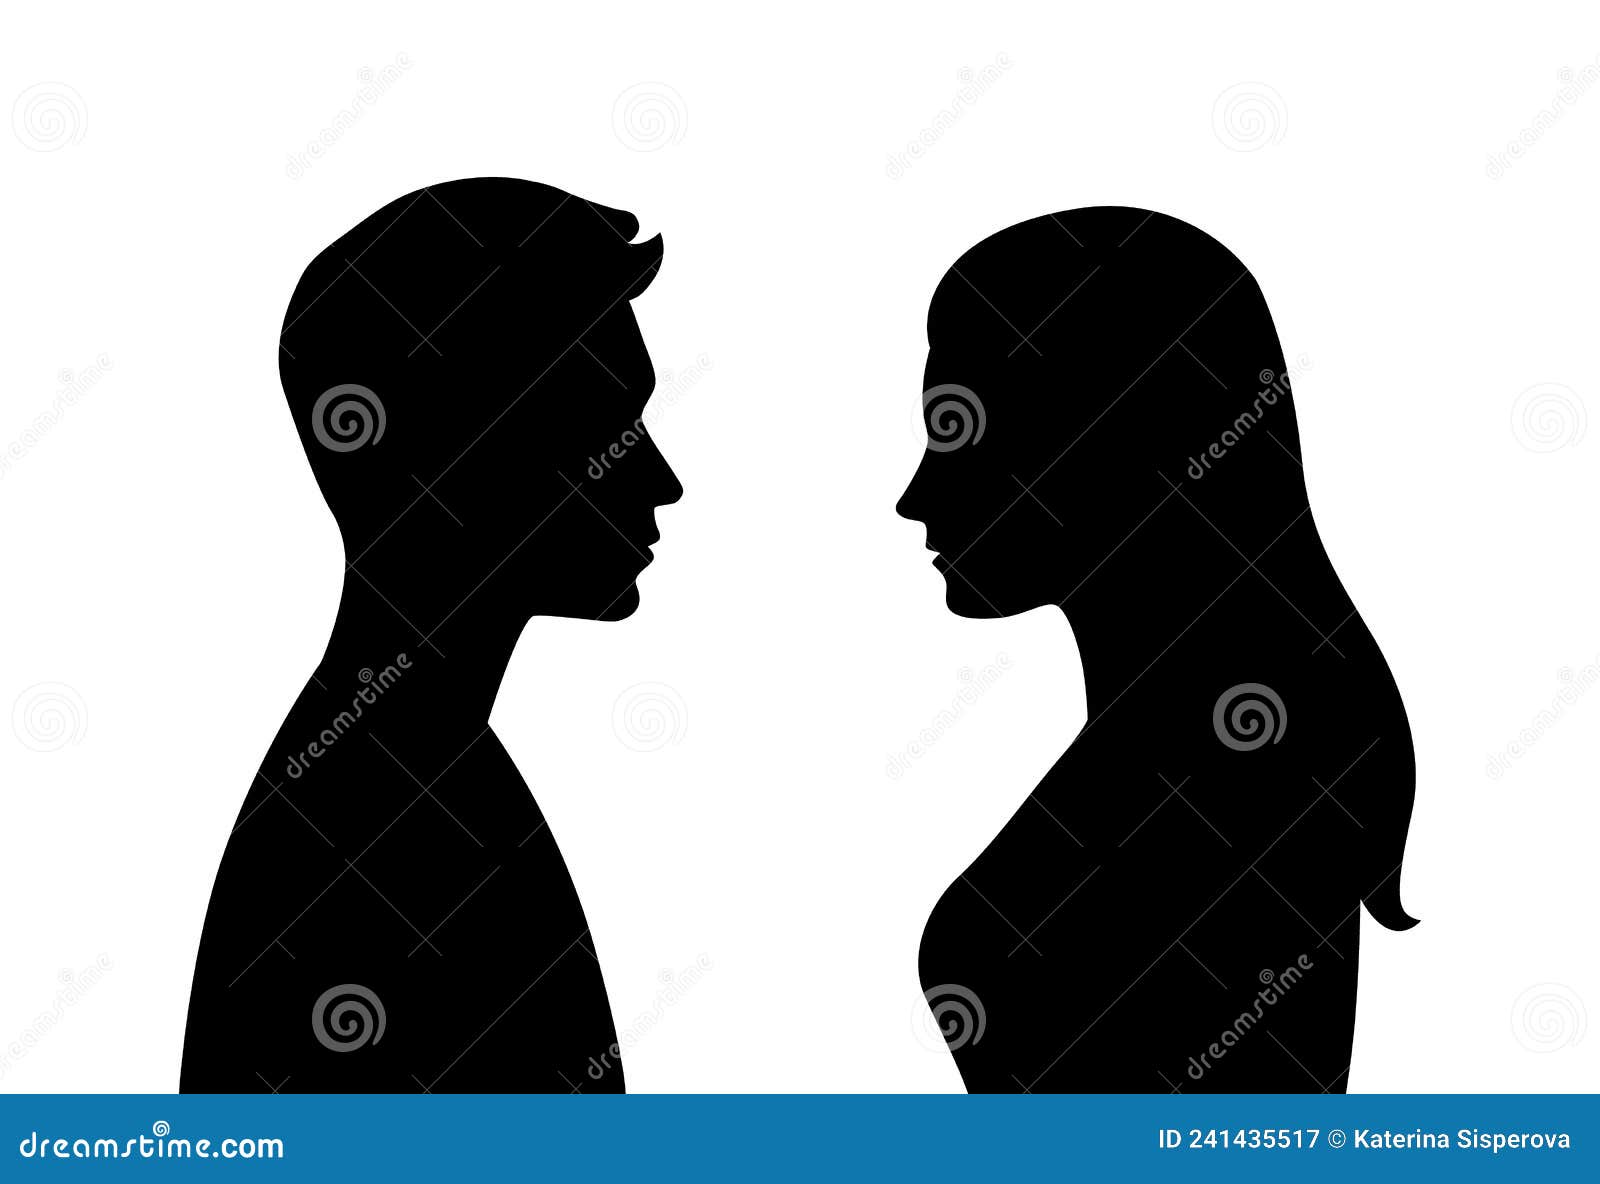 Vector Simple Silhouettes Or Icons Of Two People Woman And Man Facing